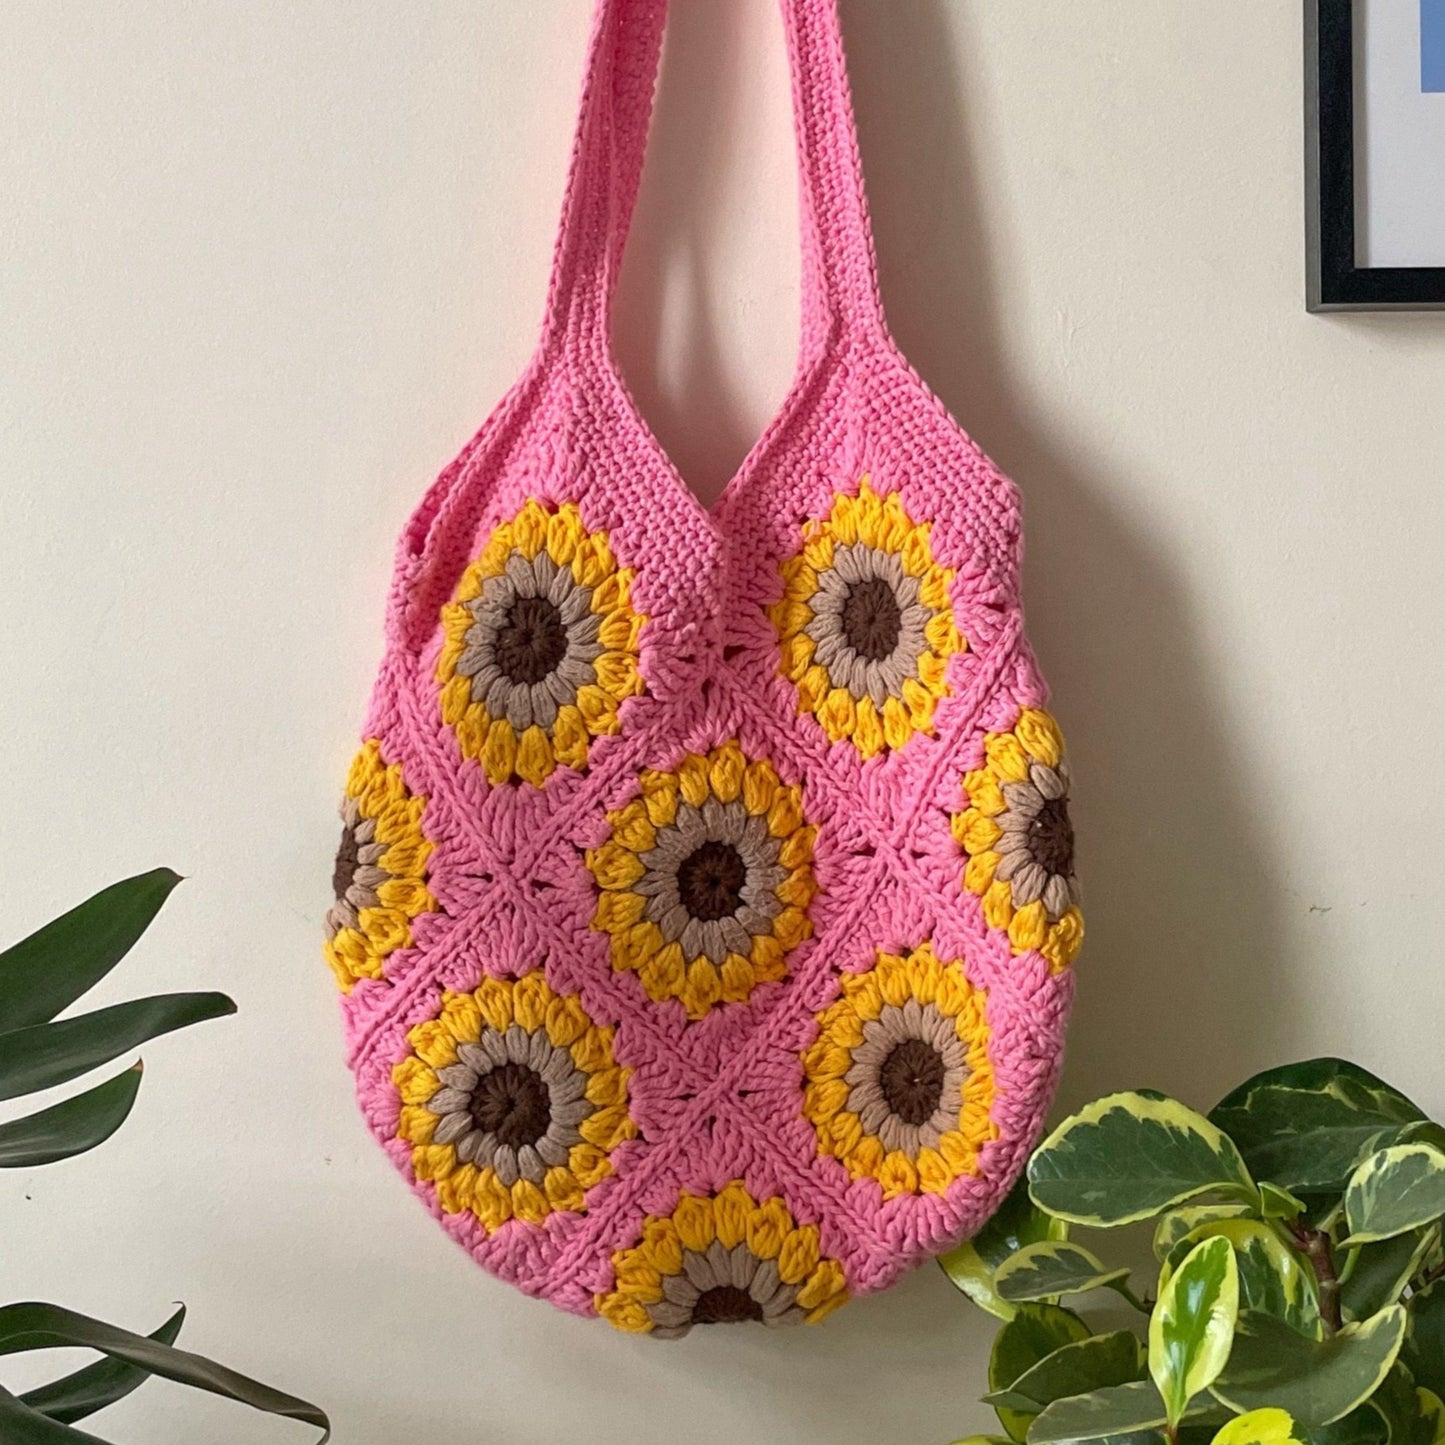 Crochet Sunflower Tote Bag in Pink